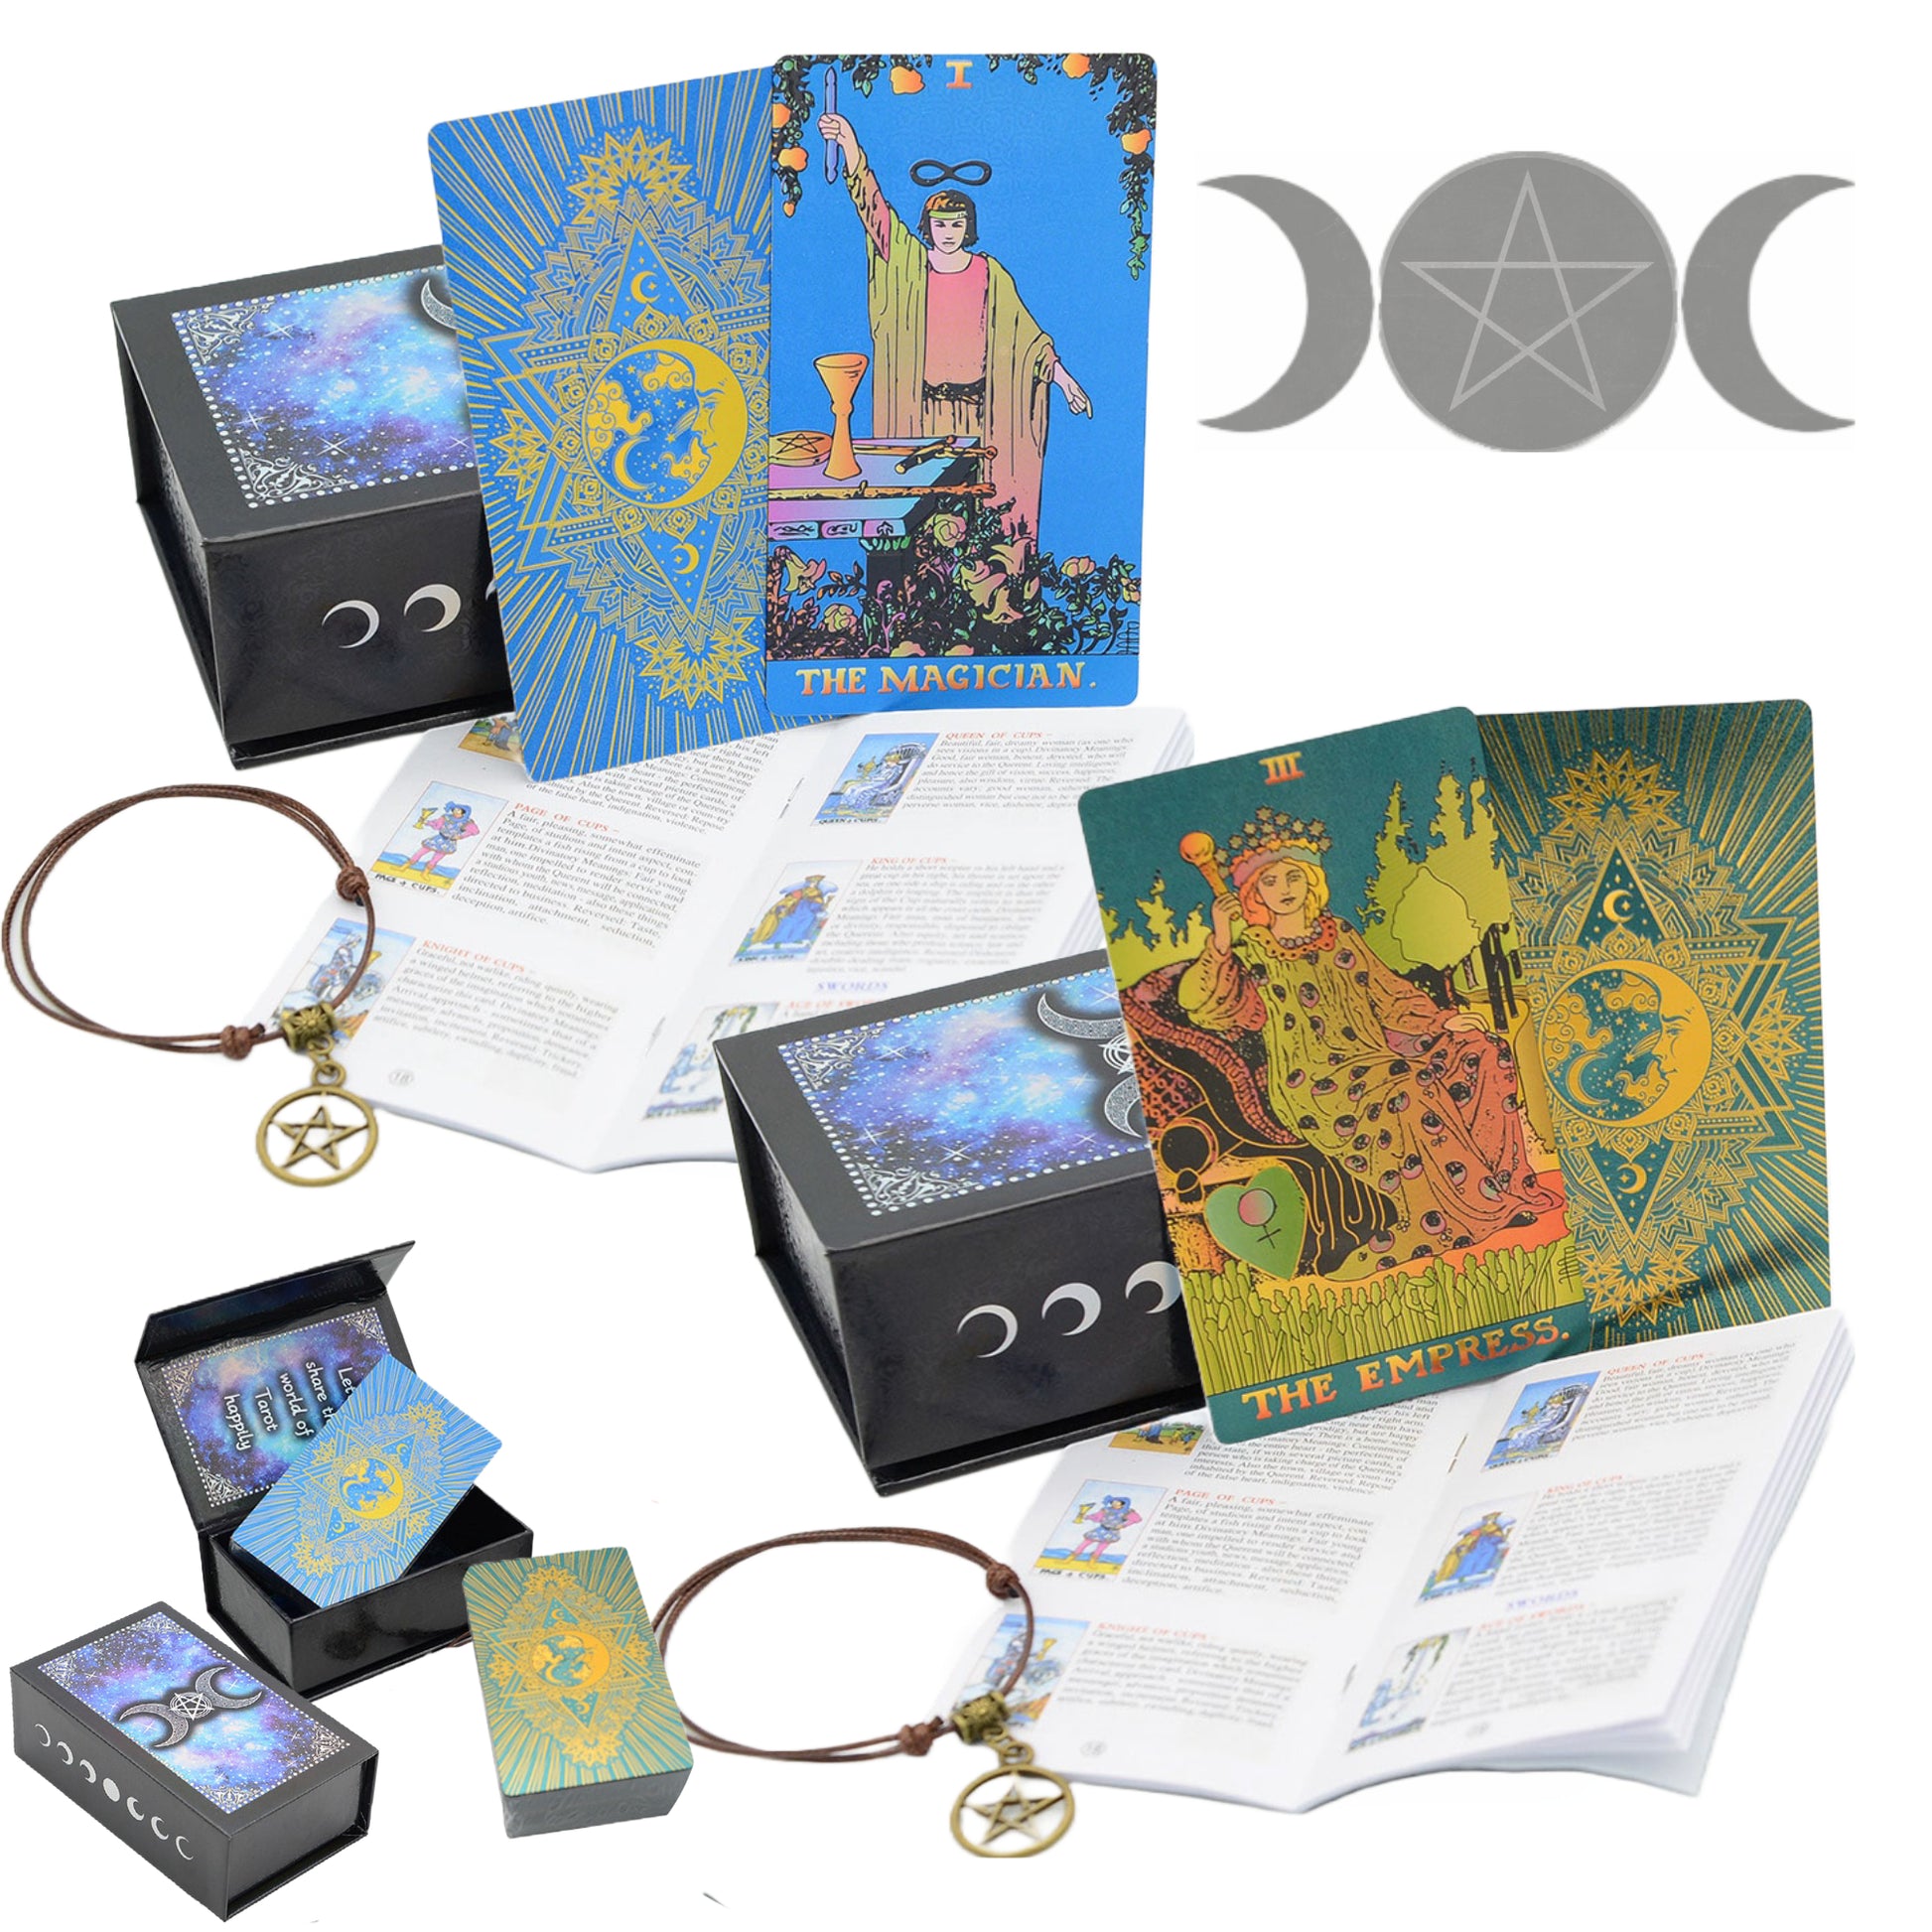 Colorful Tarot Deck In Premium Witchy Gift Box | Premium PVC Cards With English Guidebook For Beginners In Divination | Apollo Tarot Shop